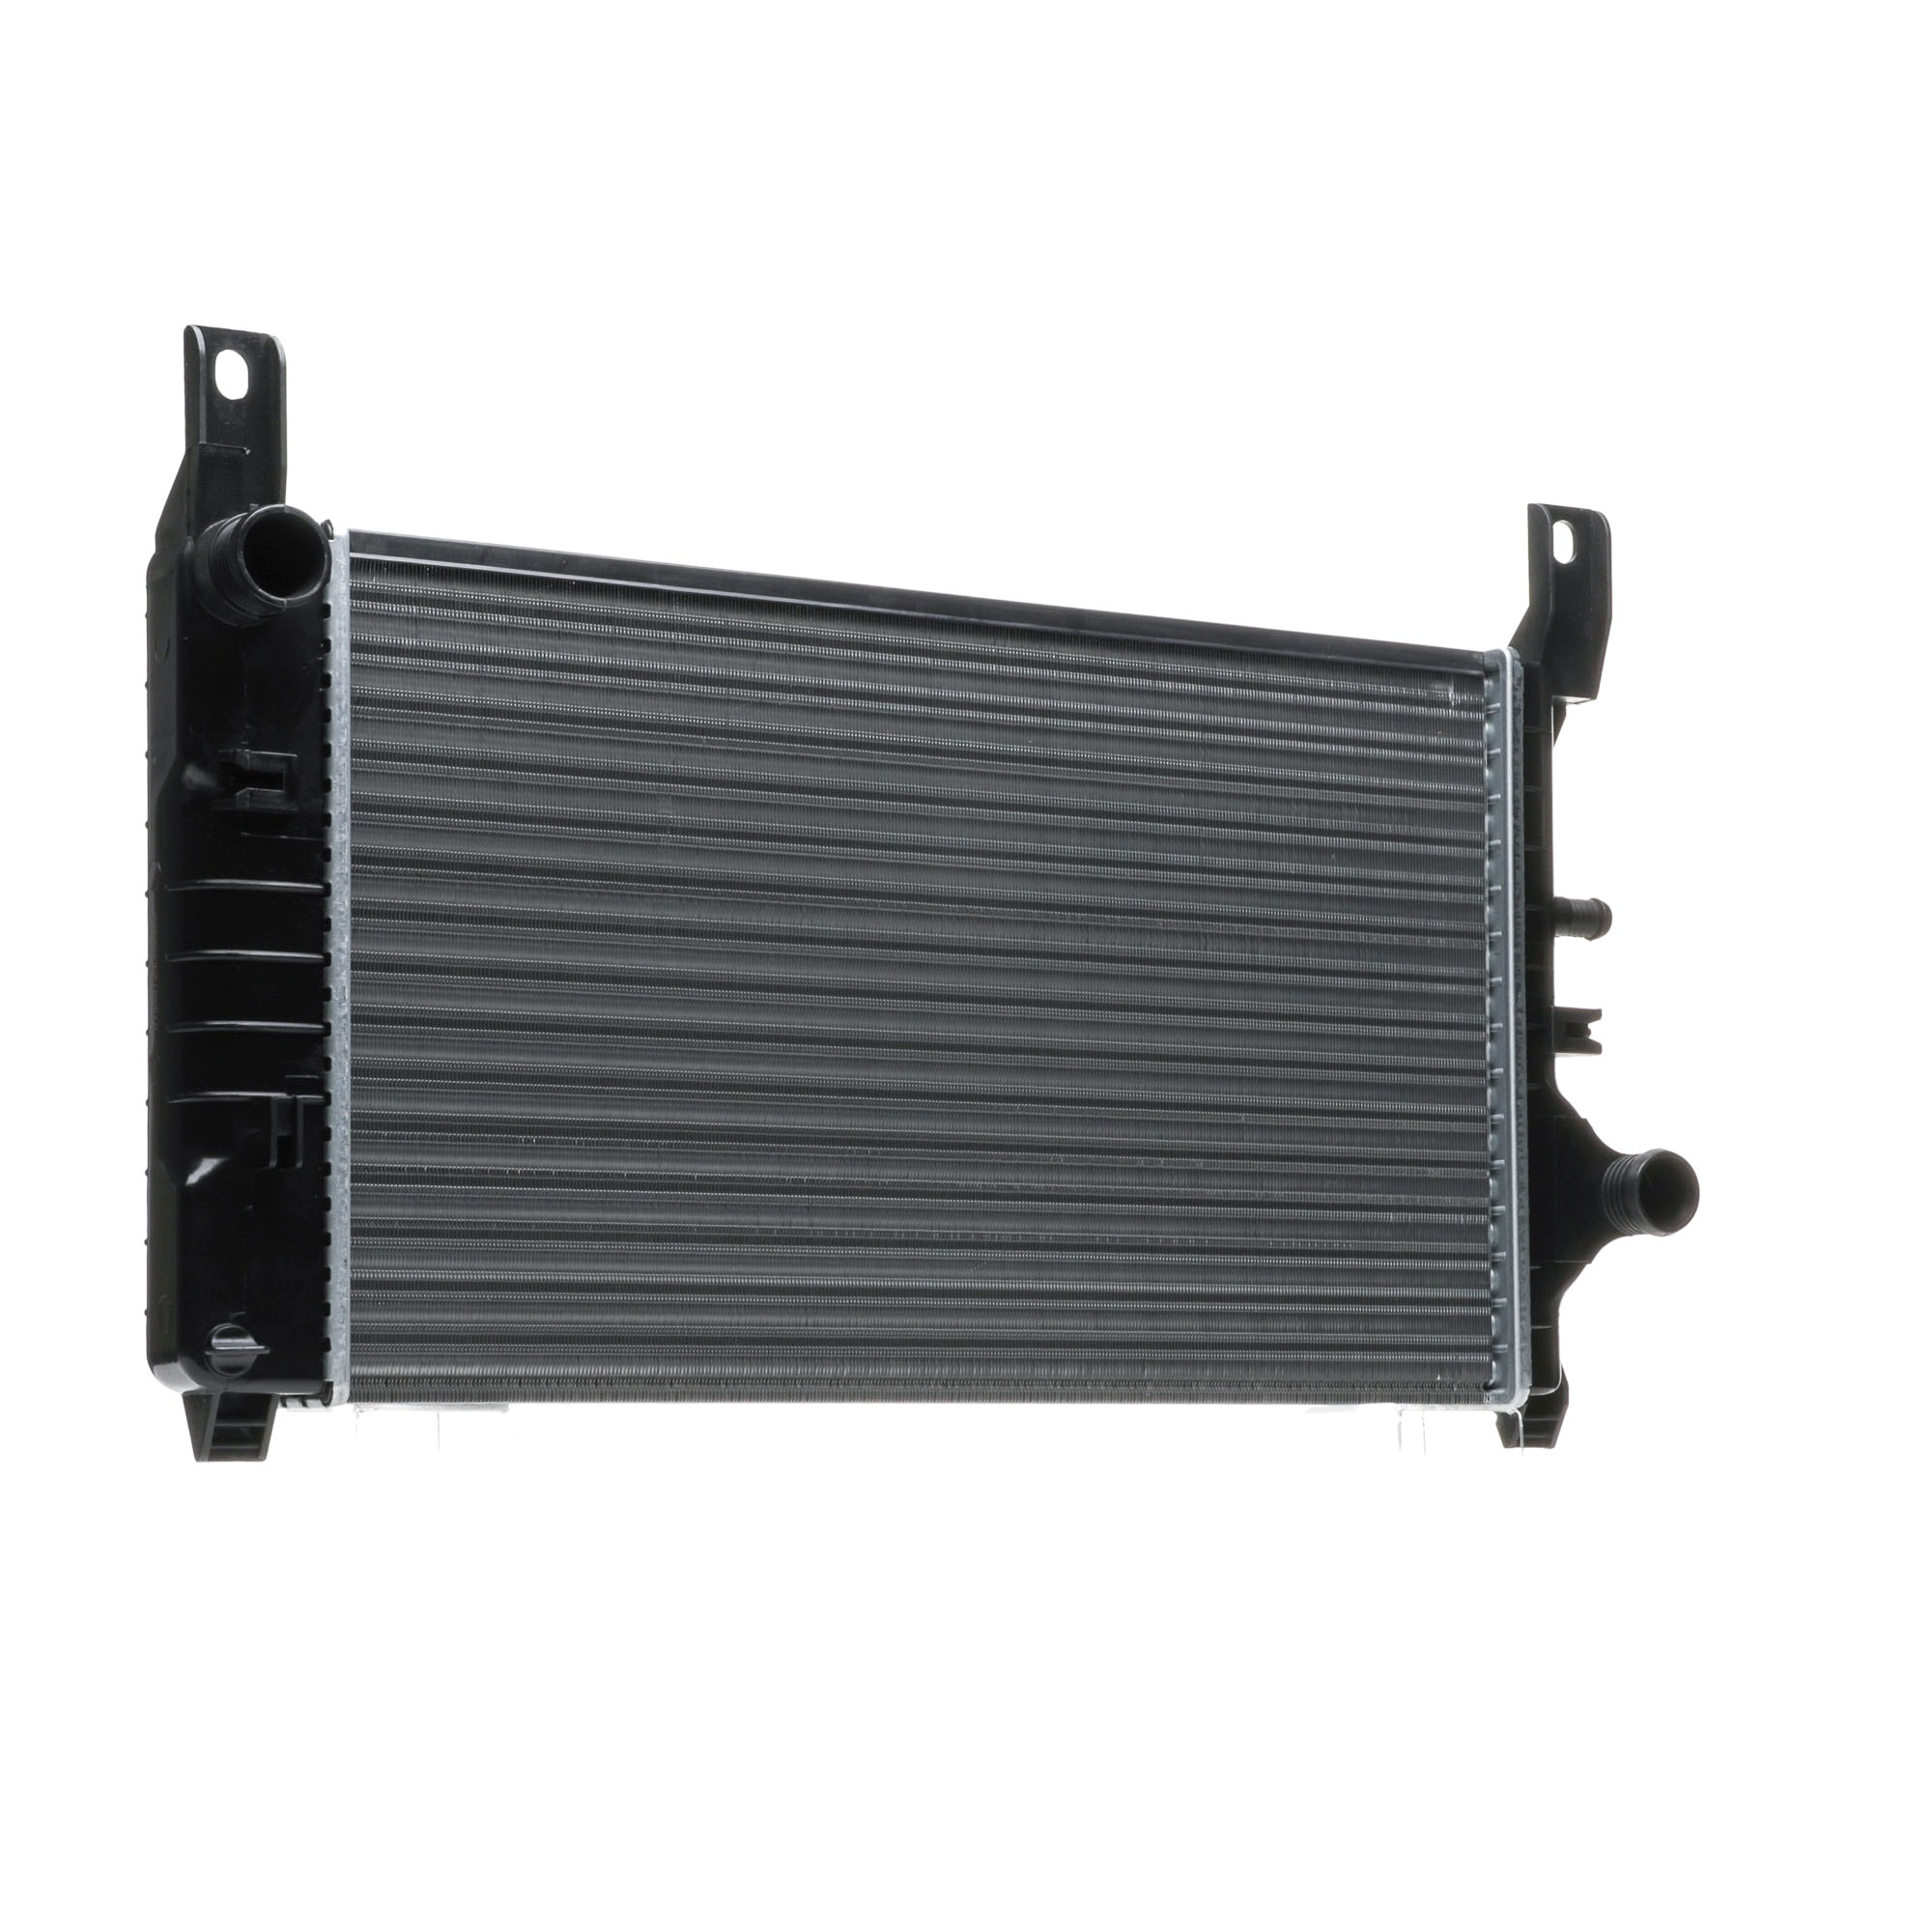 STARK SKRD-0120723 Engine radiator for vehicles without air conditioning, Manual Transmission, Brazed cooling fins